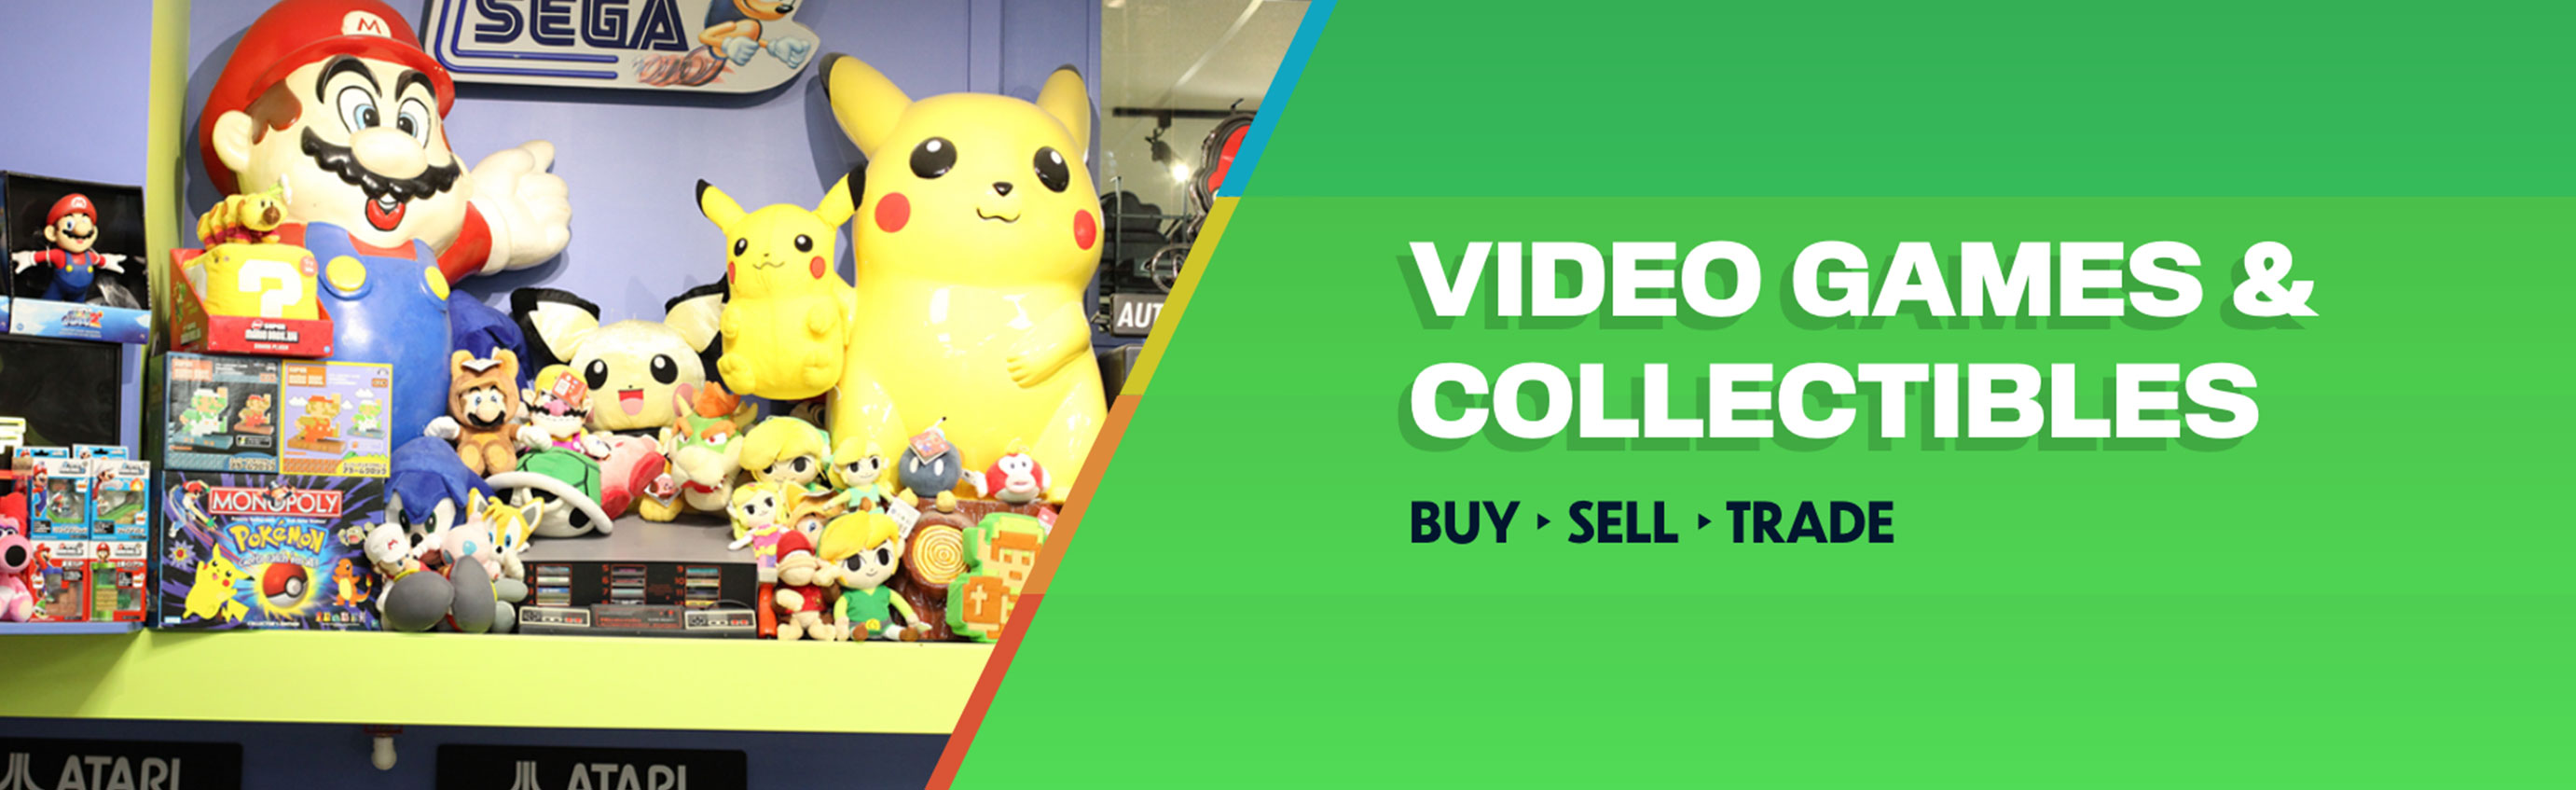 closest video game store